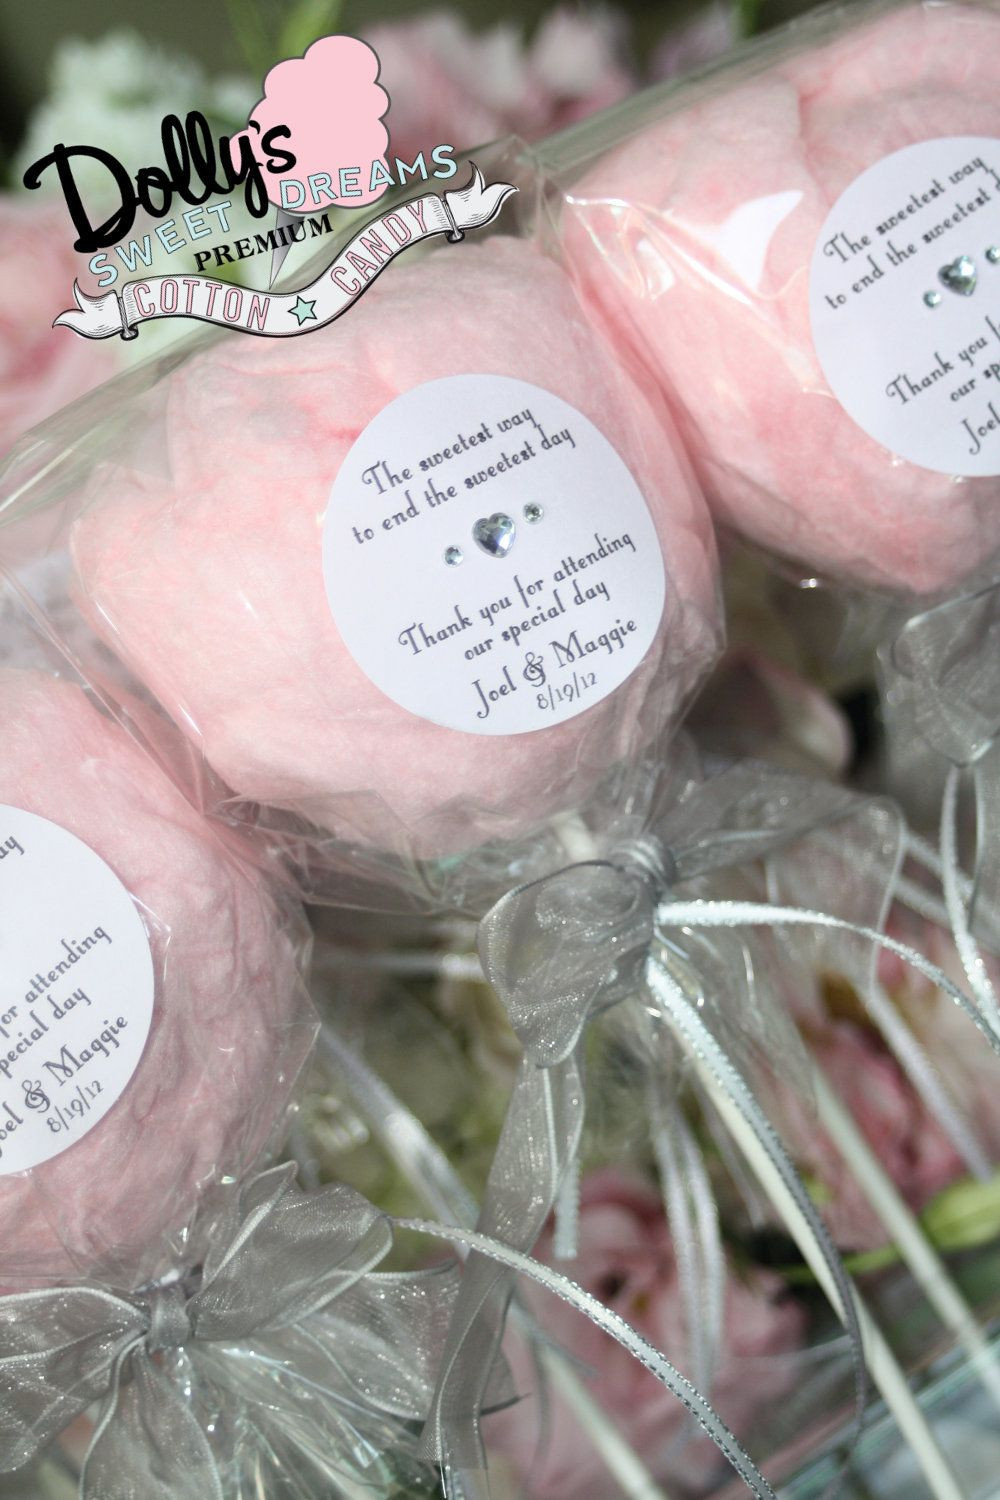 Cotton Candy Wedding Favors
 100 Cotton Candy Lollipops with Custom Labels